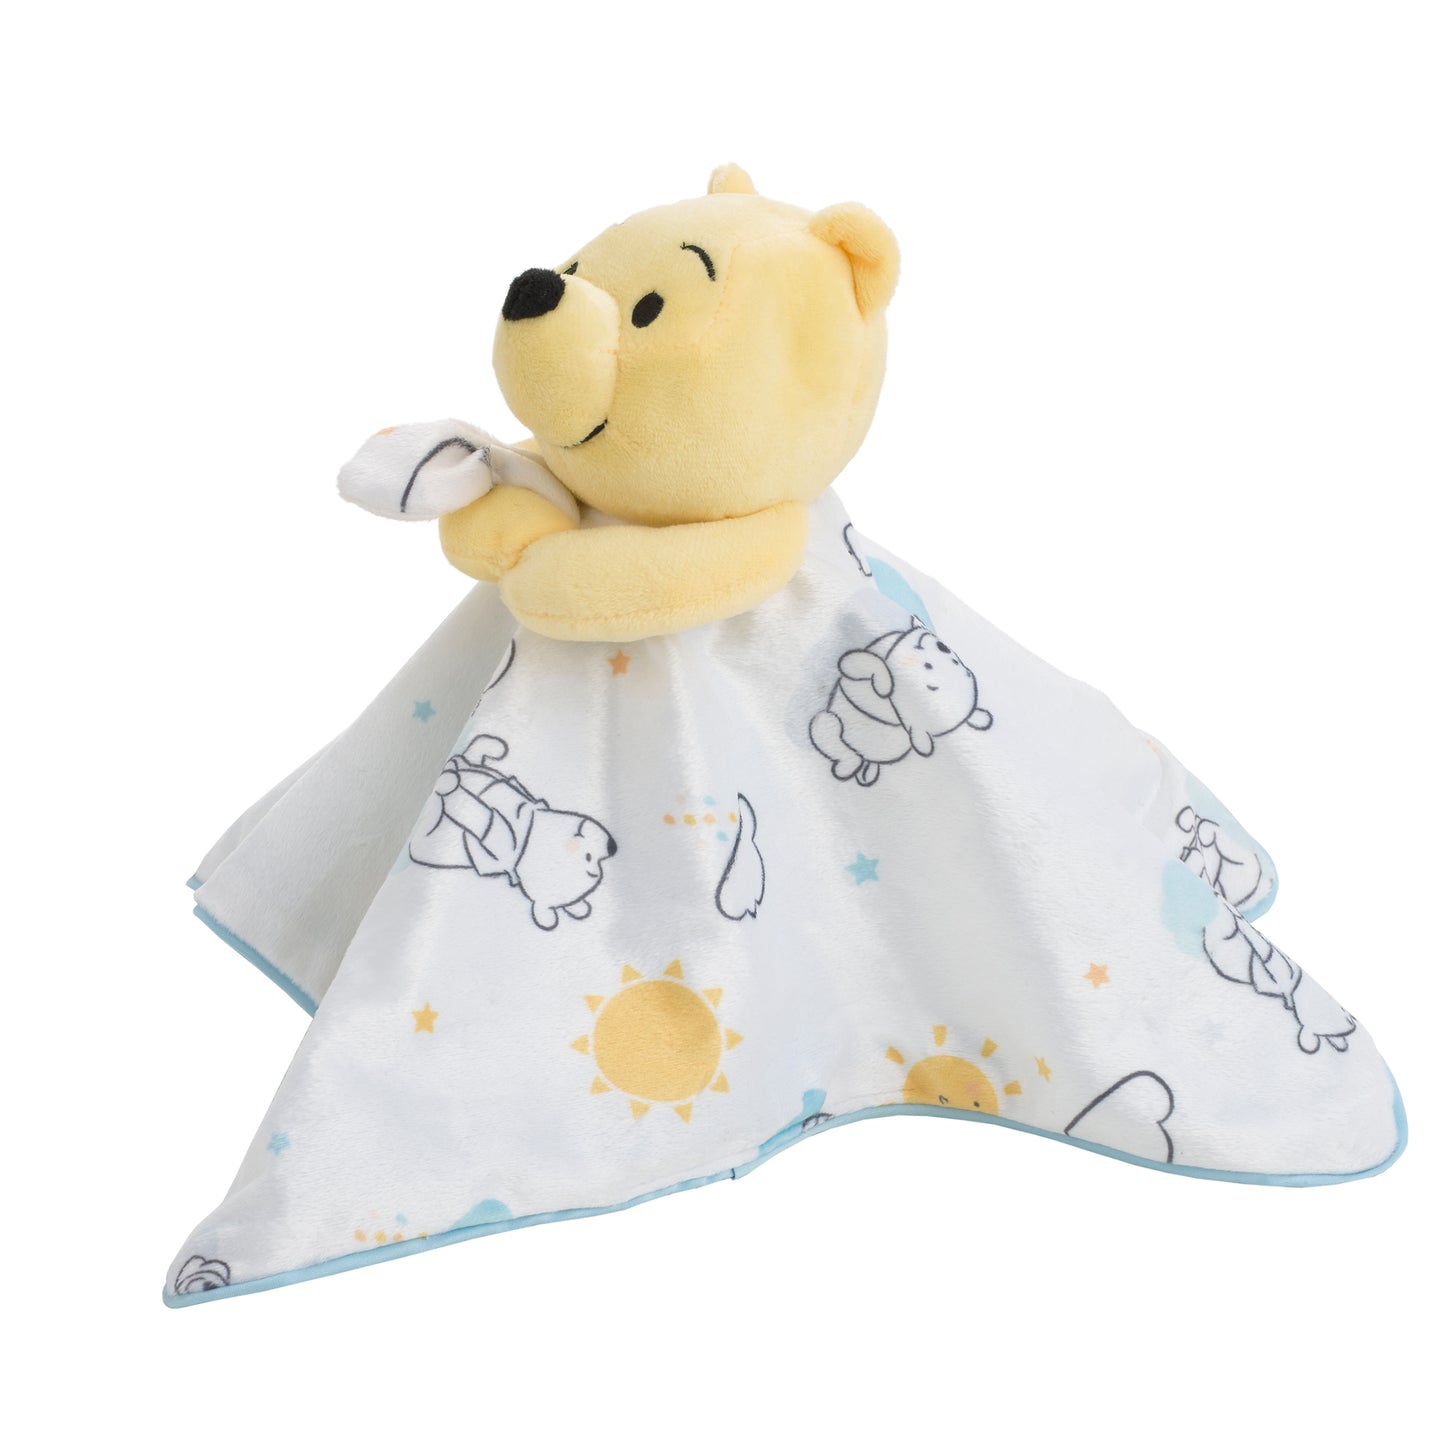 Disney Winnie the Pooh White, Yellow, and Aqua Cloud and Sun Lovey Security Blanket